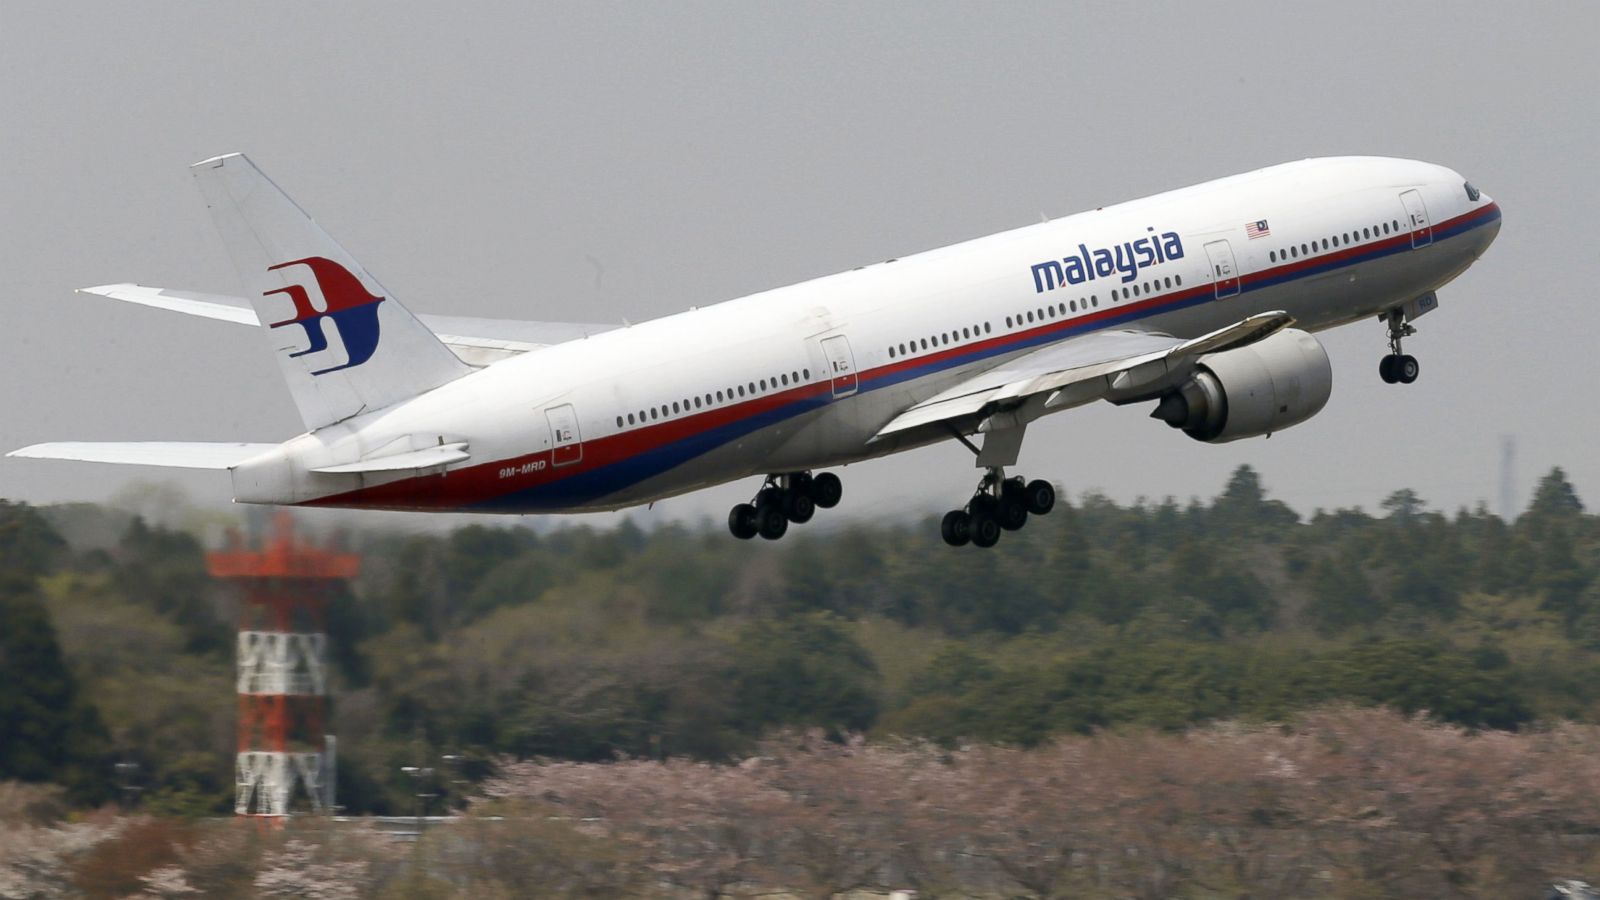 What To Expect If Debris From Missing Malaysia Plane Is Found